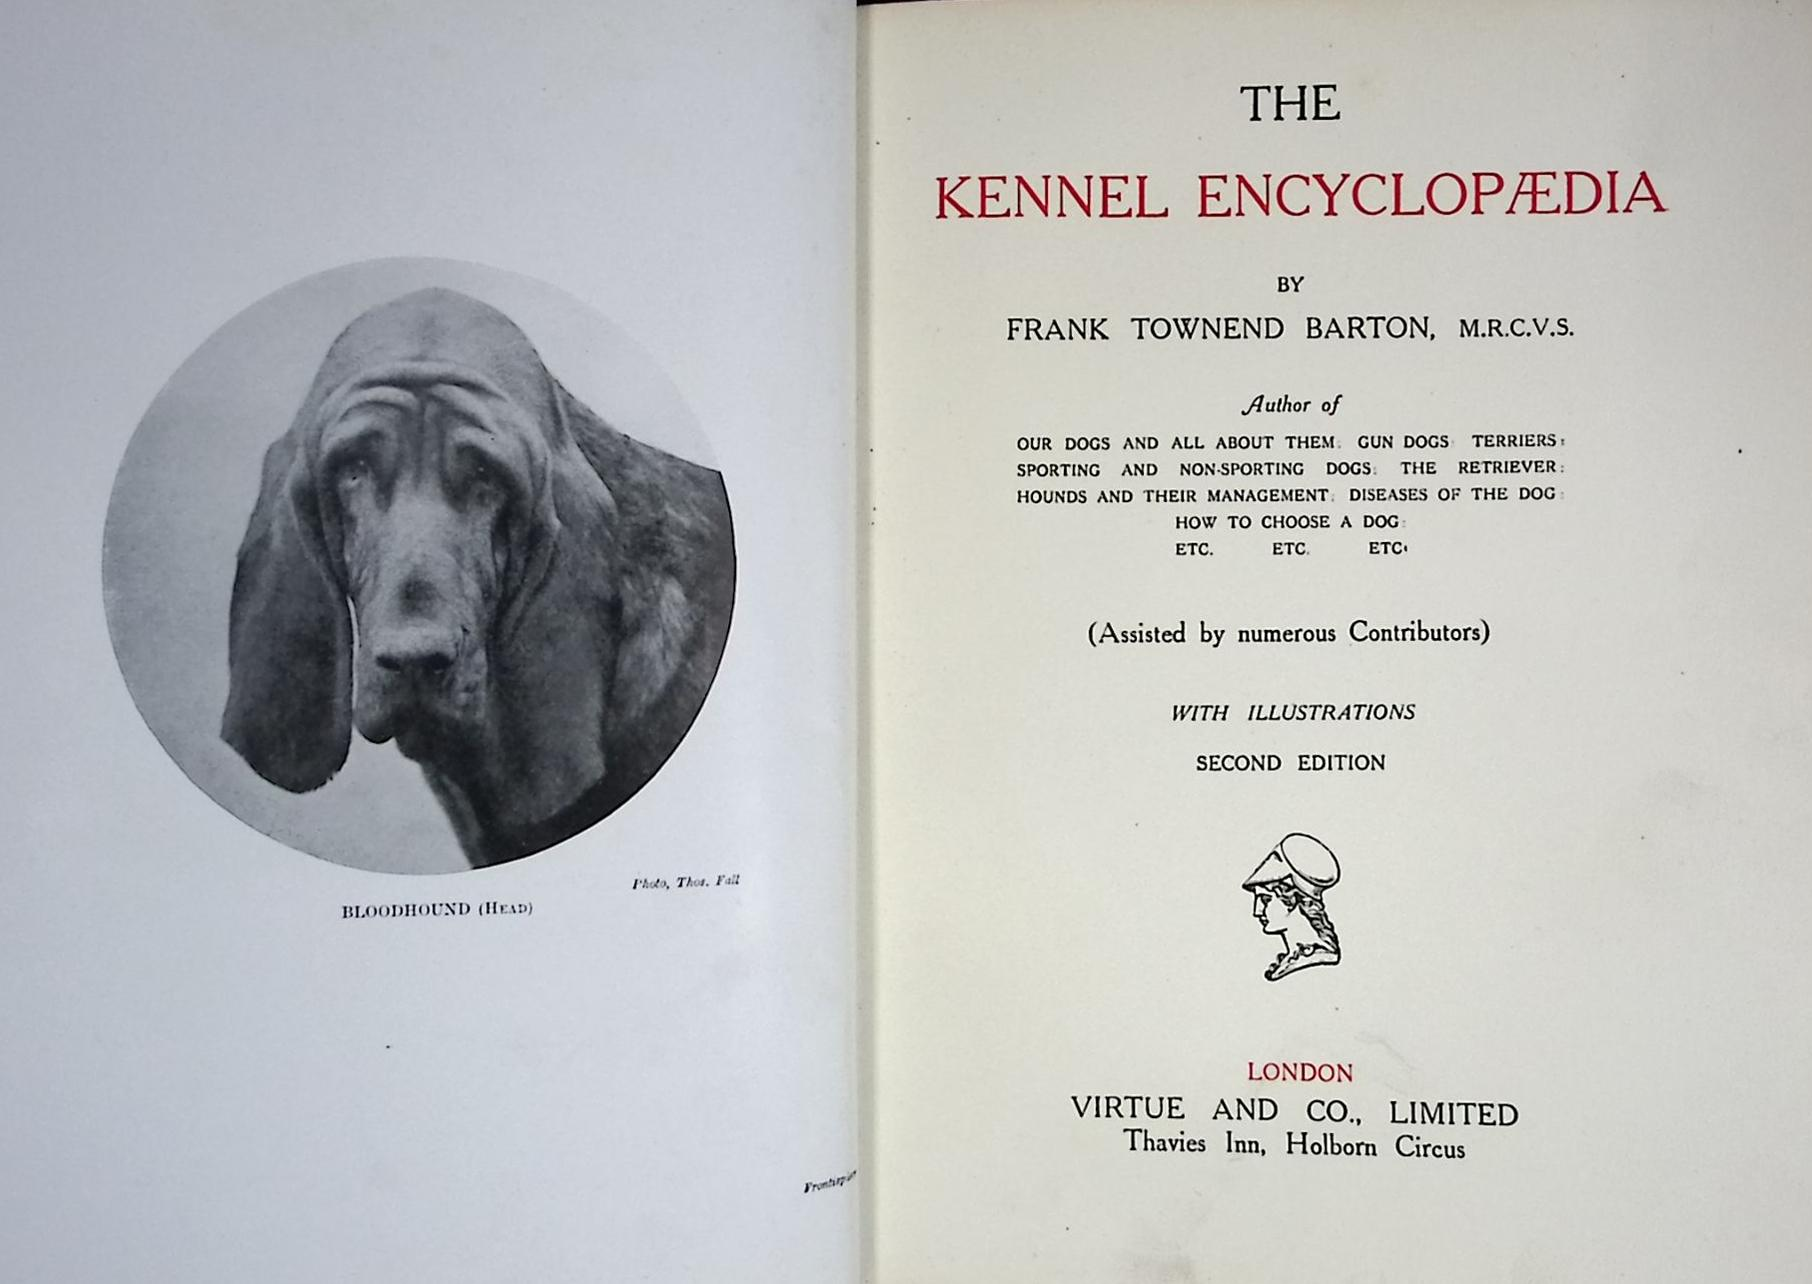 The Kennel Encyclopdia